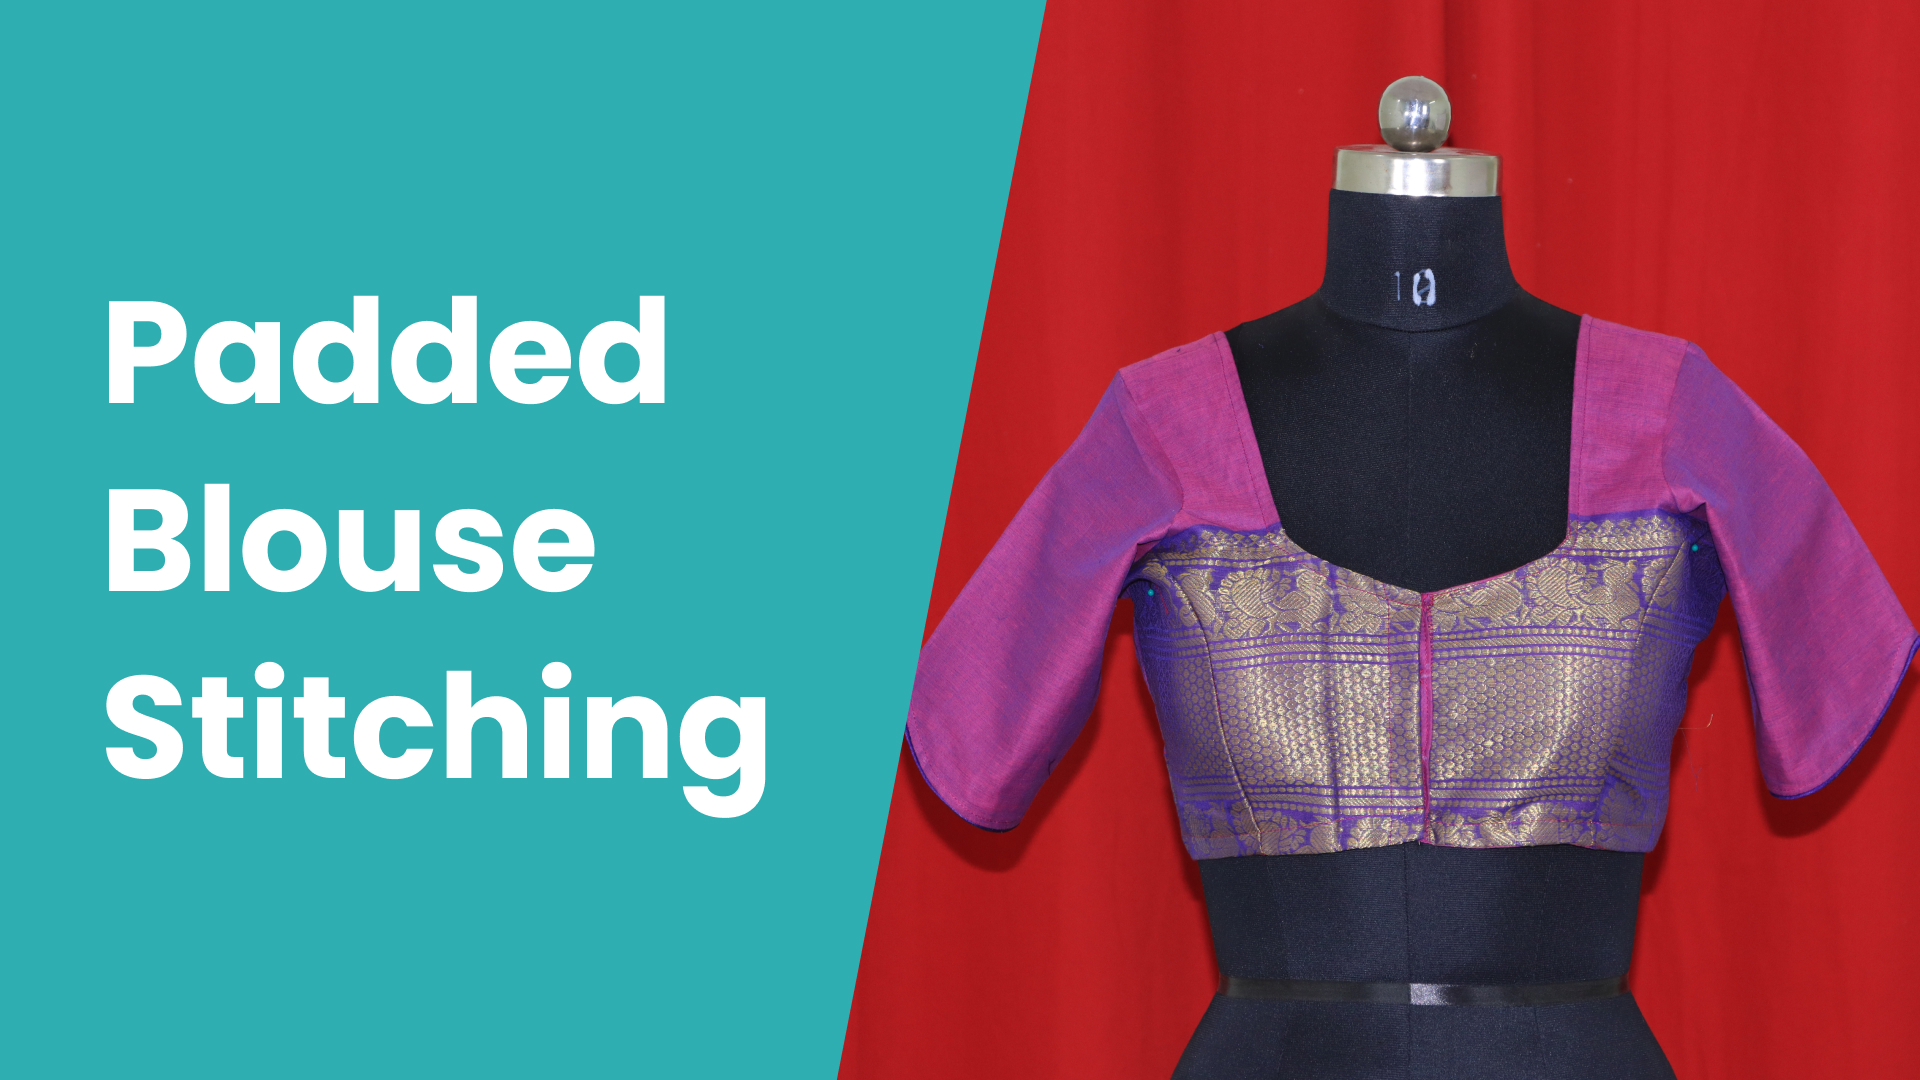 Course Trailer: How to stitch a Padded Pattern Blouse?. Watch to know more.